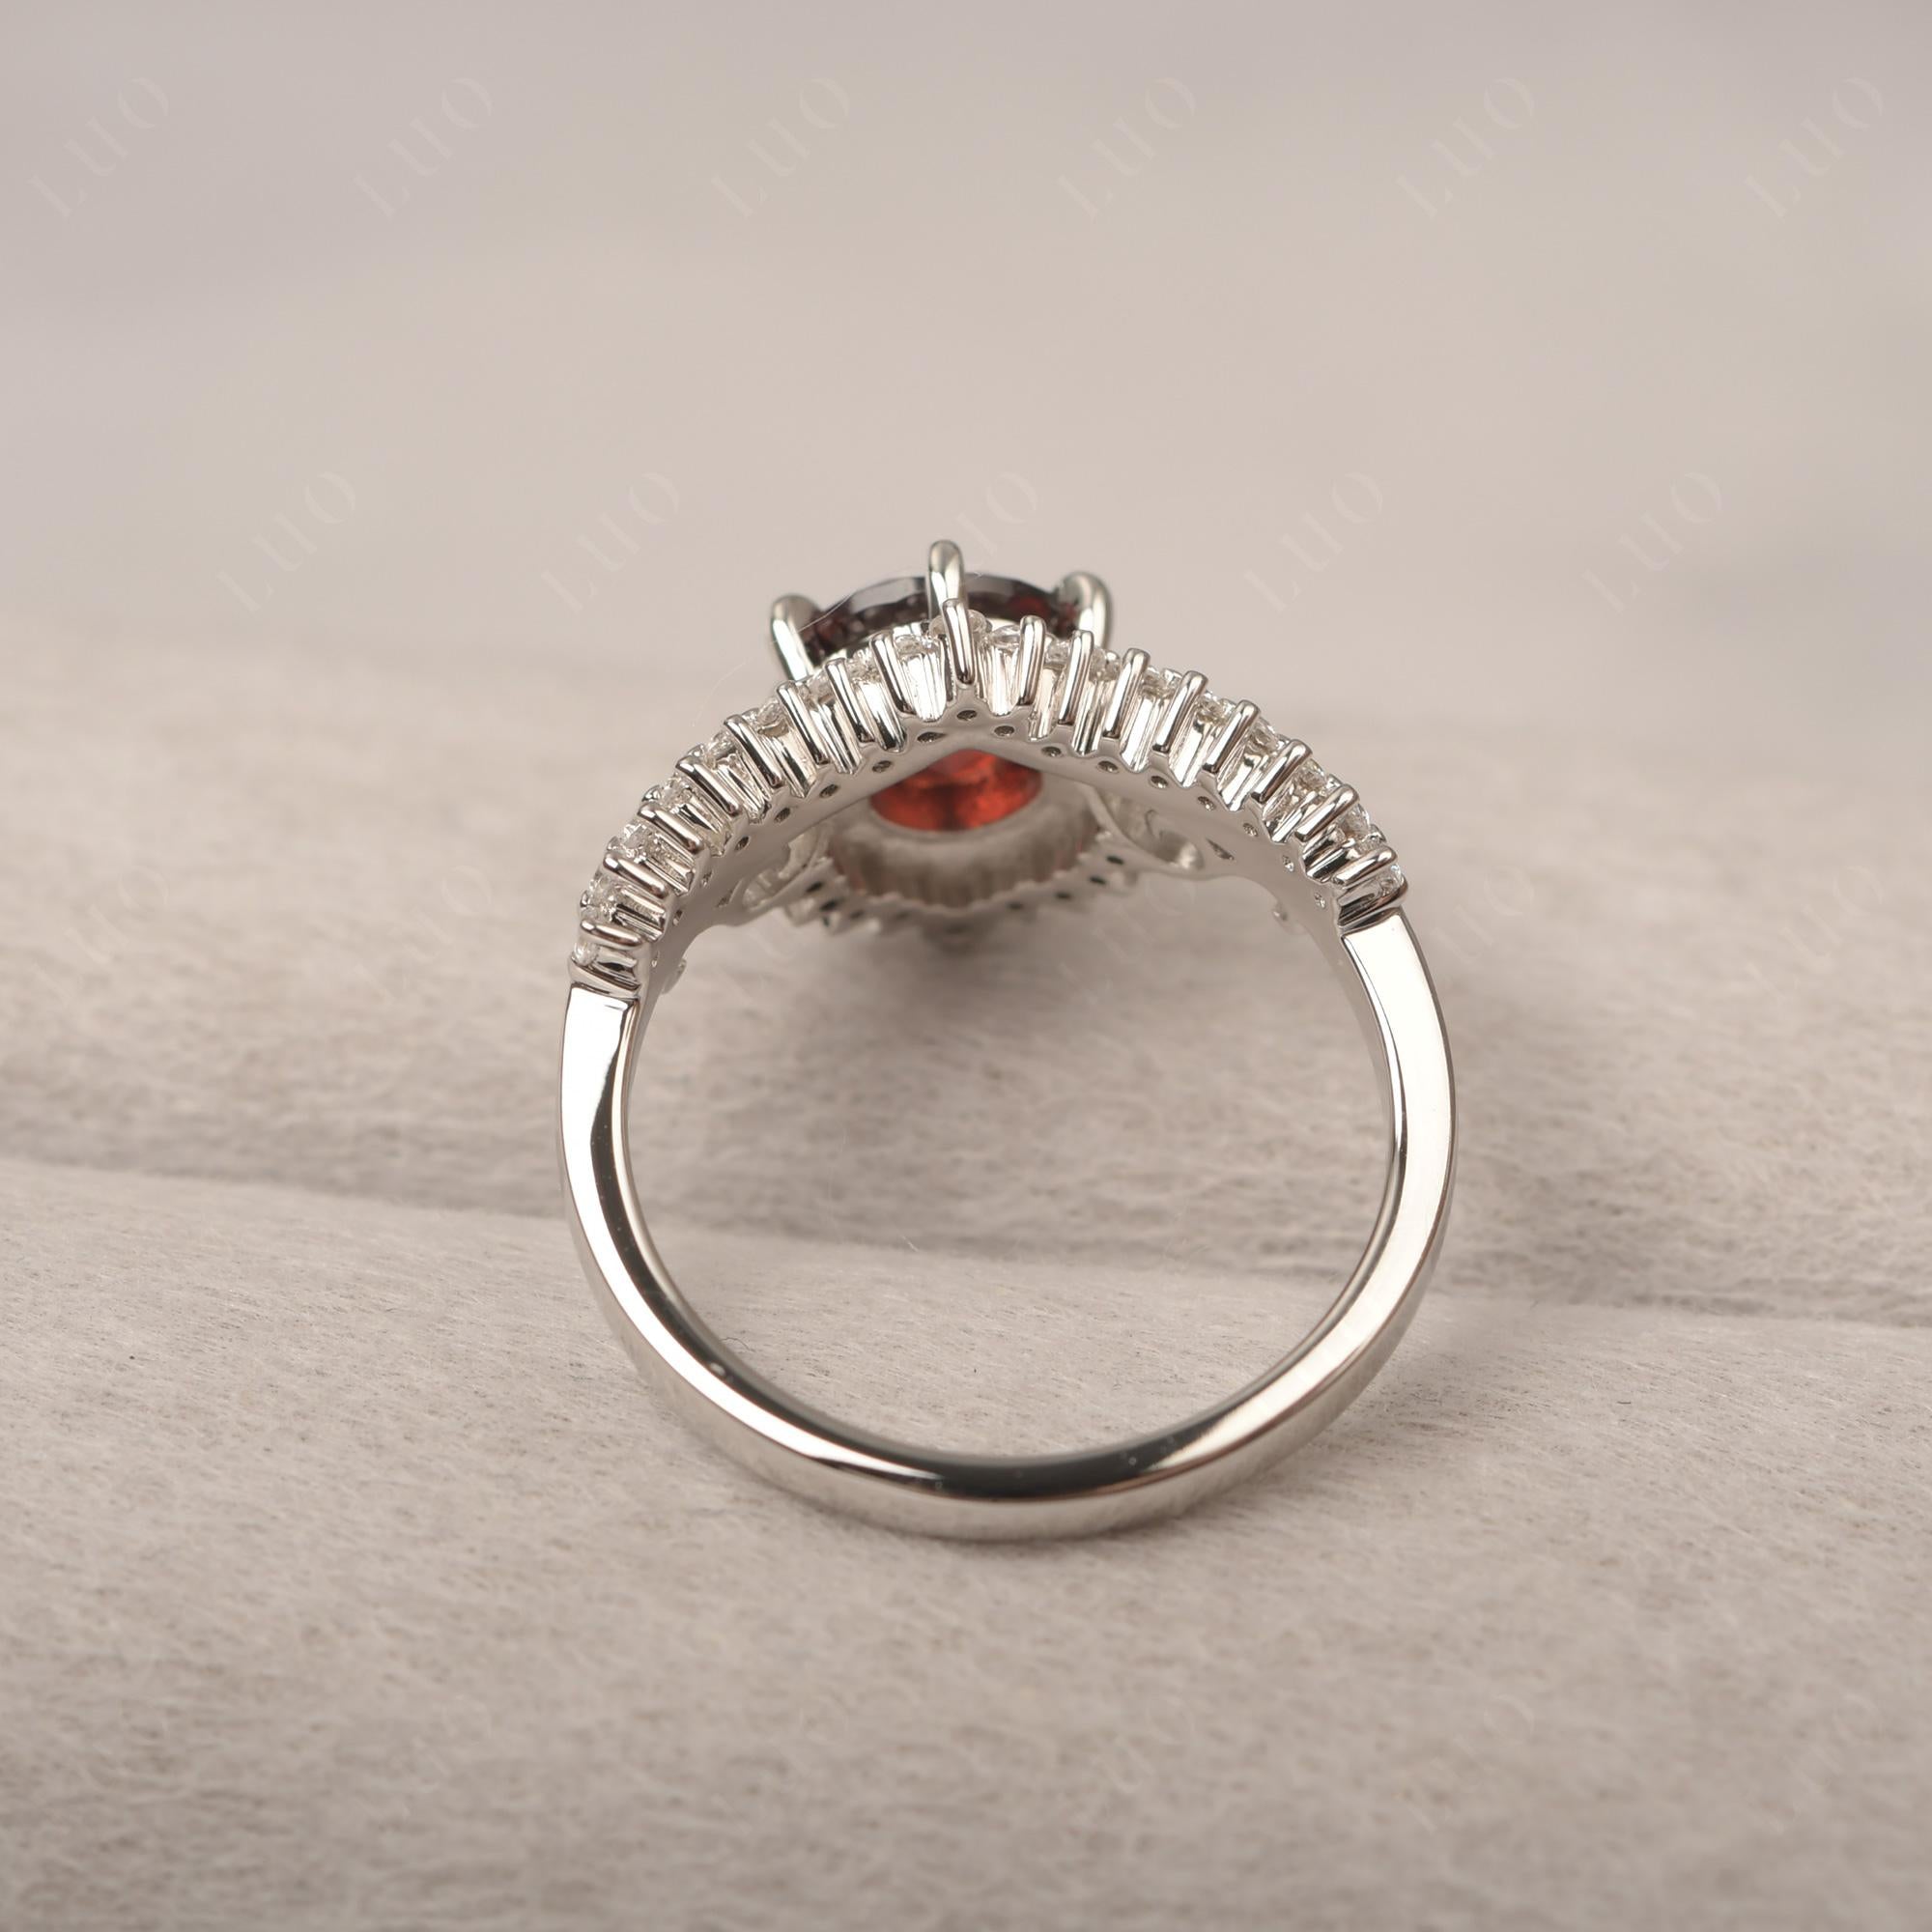 Vintage Garnet Cocktail Ring - LUO Jewelry